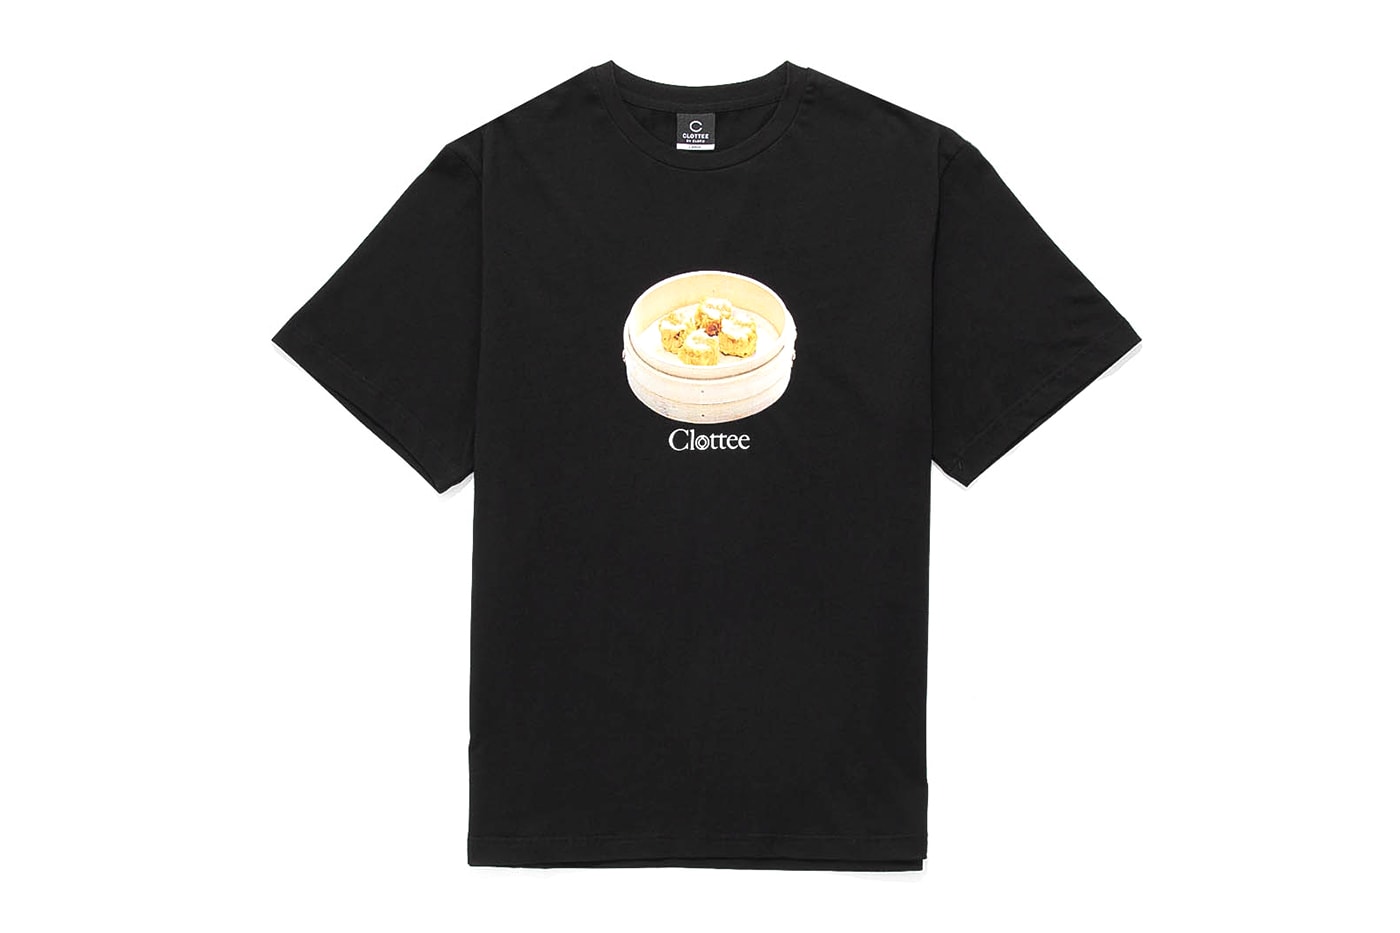 CLOTTEE by CLOT Spring 2020 Dim Sum Collection Release Info Buy Price hoodie shirt sweater t shirt bag hat accessories 